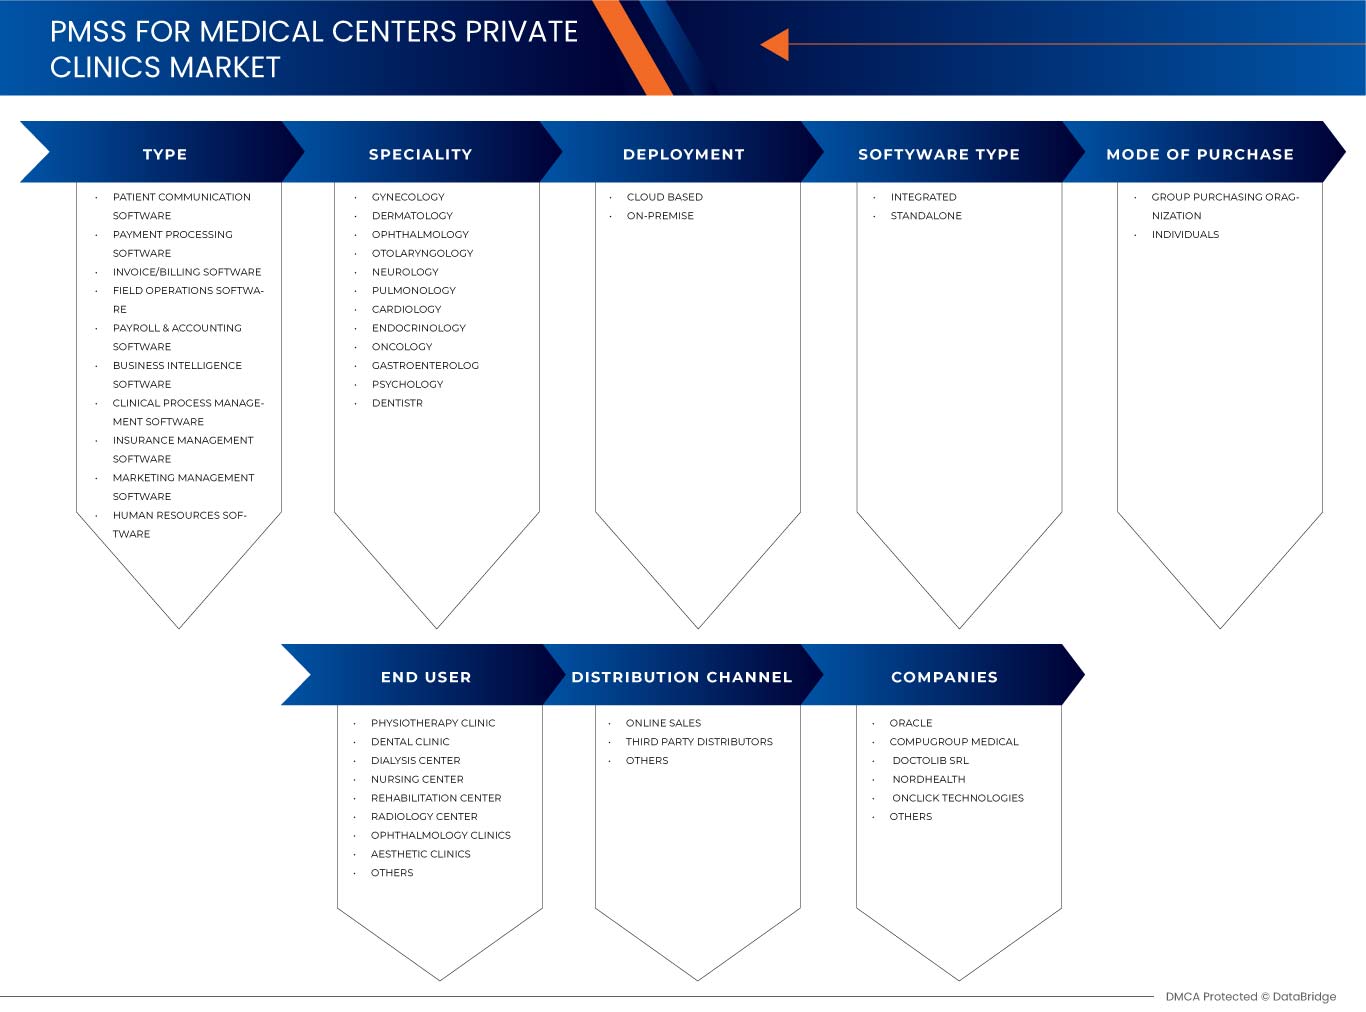 Italy PMSs for Medical Centers/Private Clinics Market